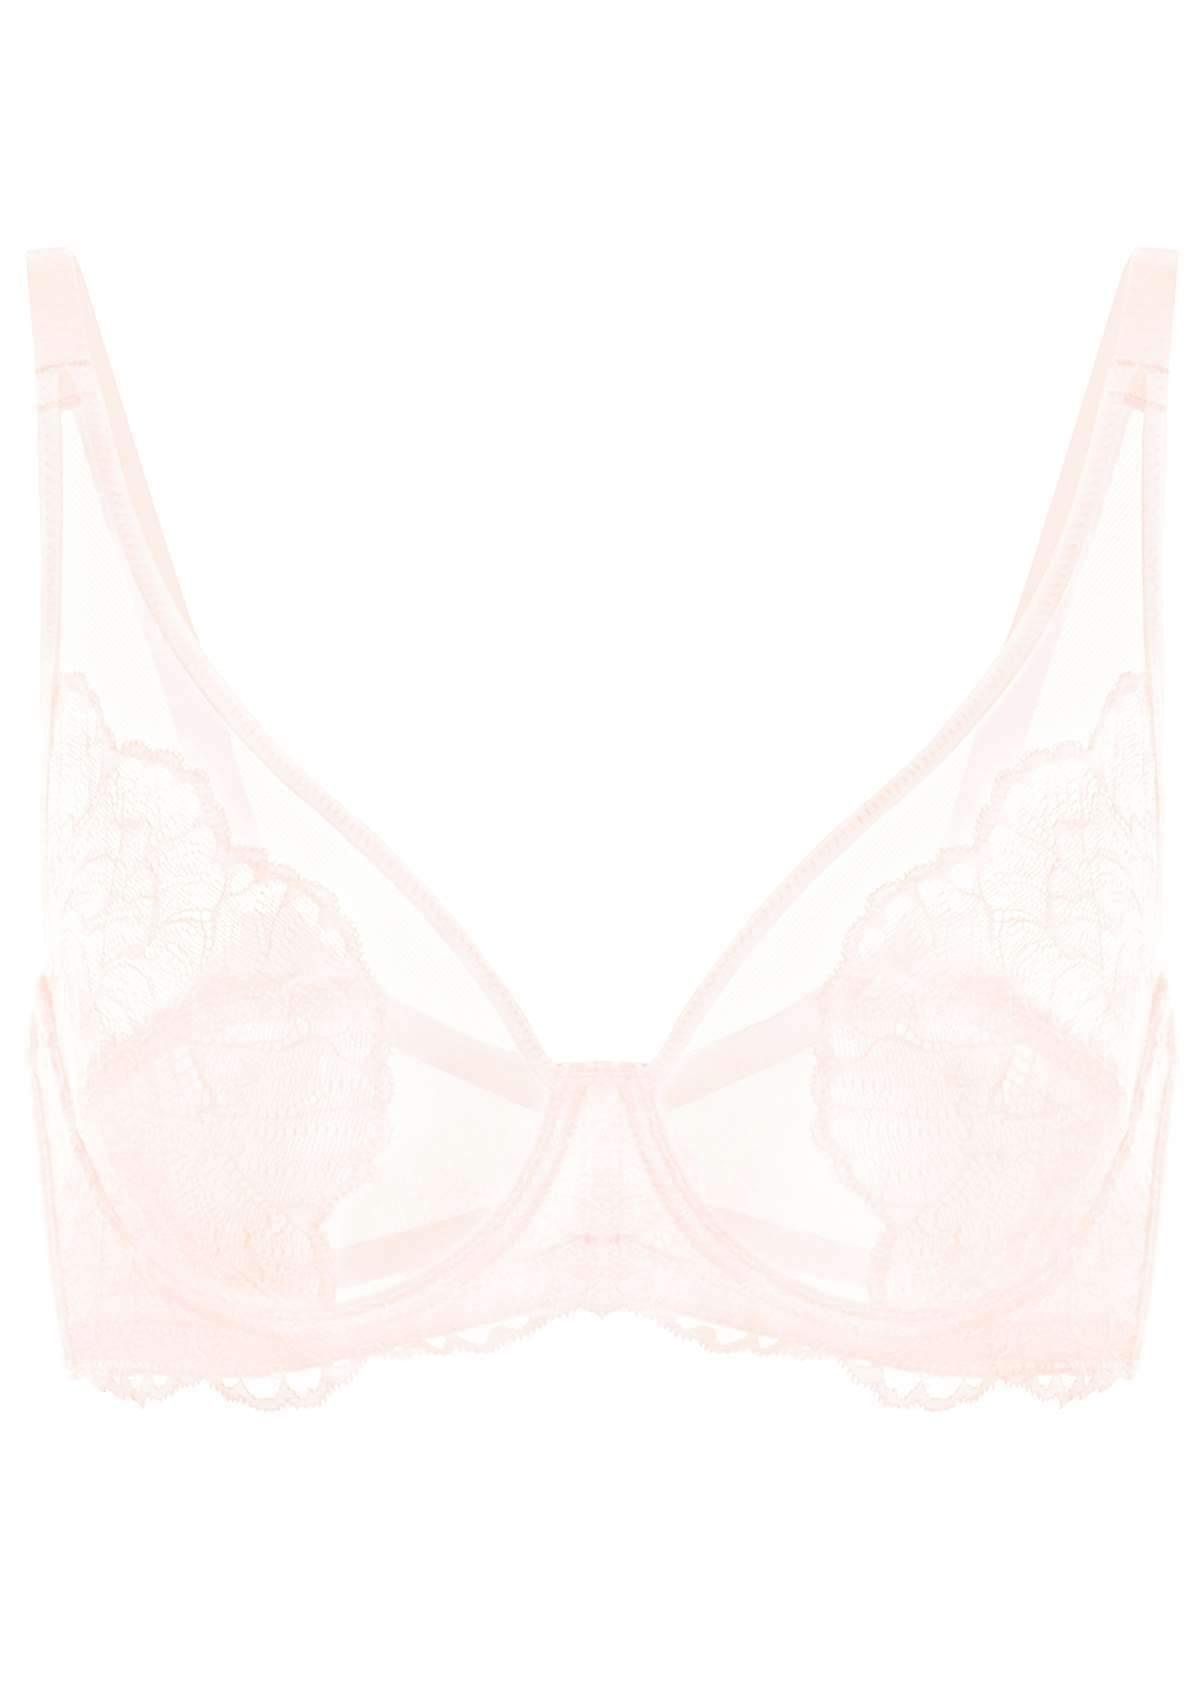 HSIA Blossom Sheer Lace Bra: Comfortable Underwire Bra For Big Busts - Dusty Peach / 34 / H